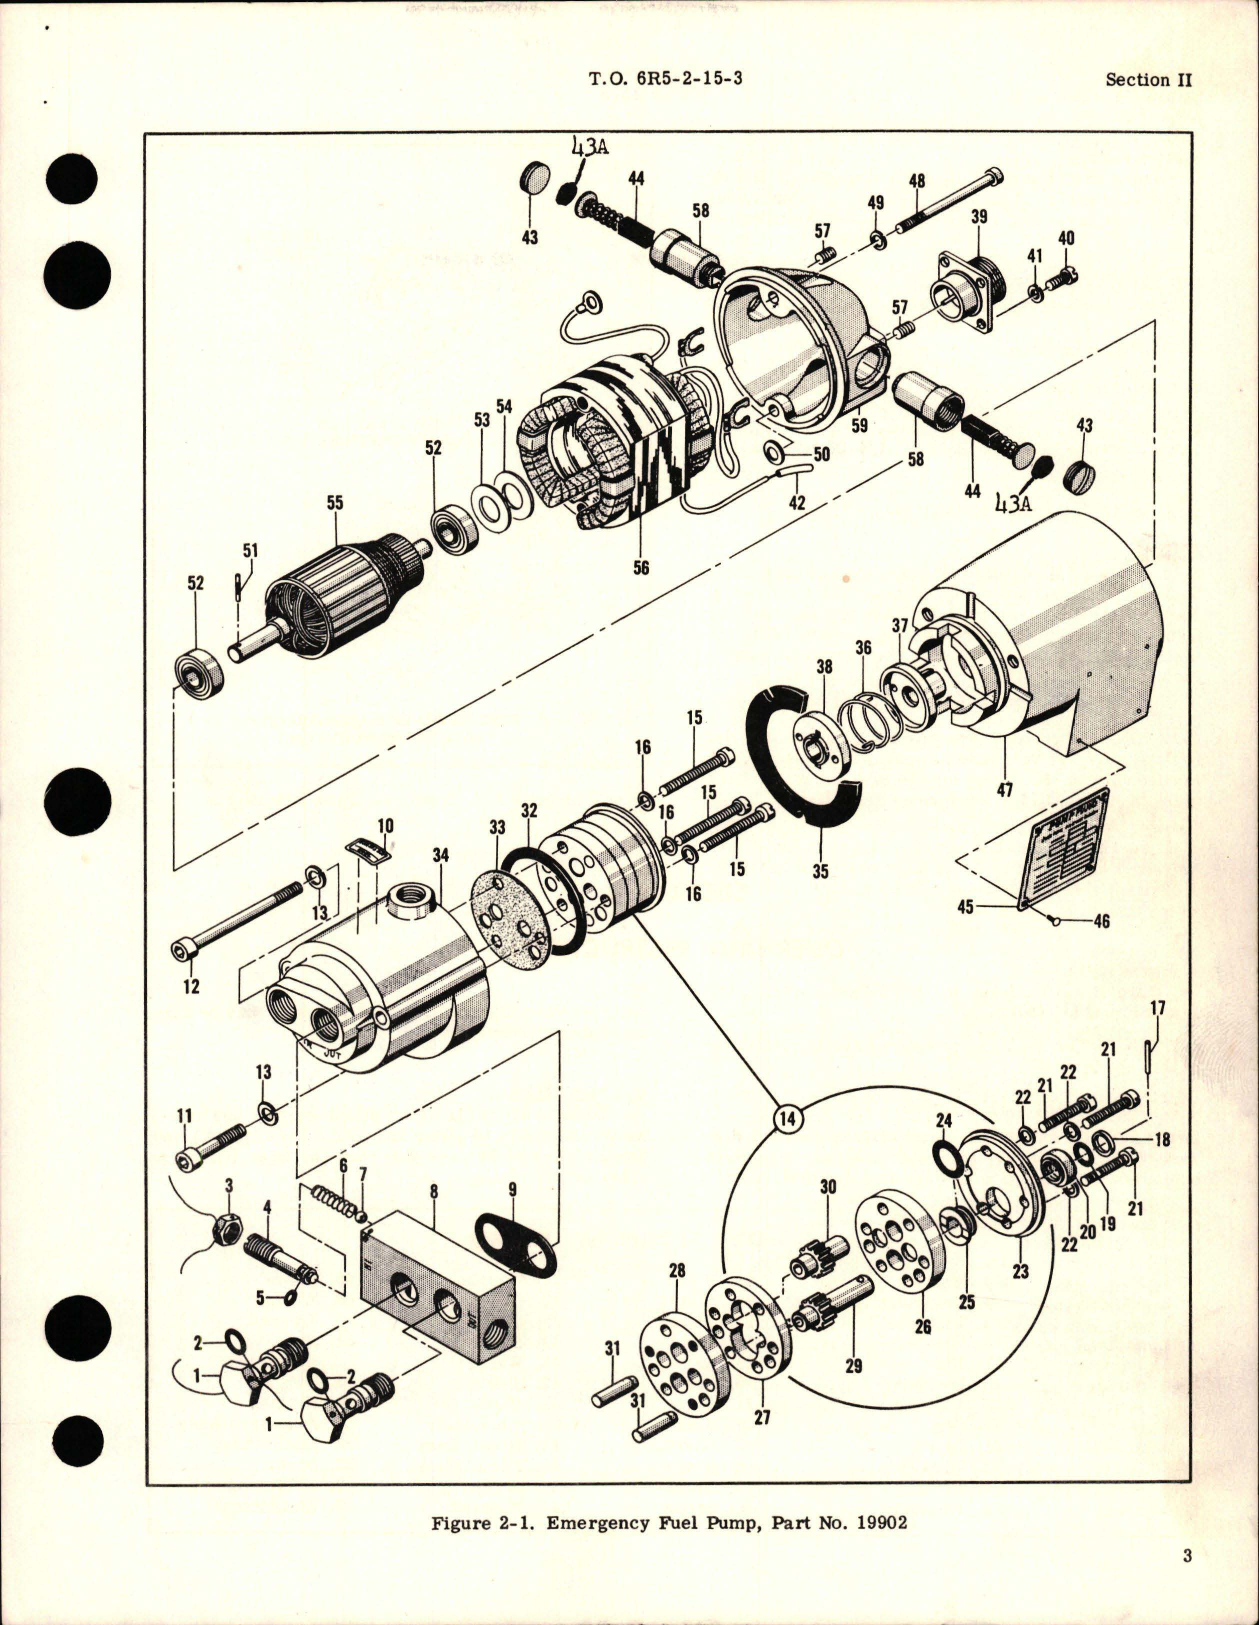 Sample page 5 from AirCorps Library document: Overhaul Instructions for Emergency Fuel Pumps - Parts 19902 and 20653-2 